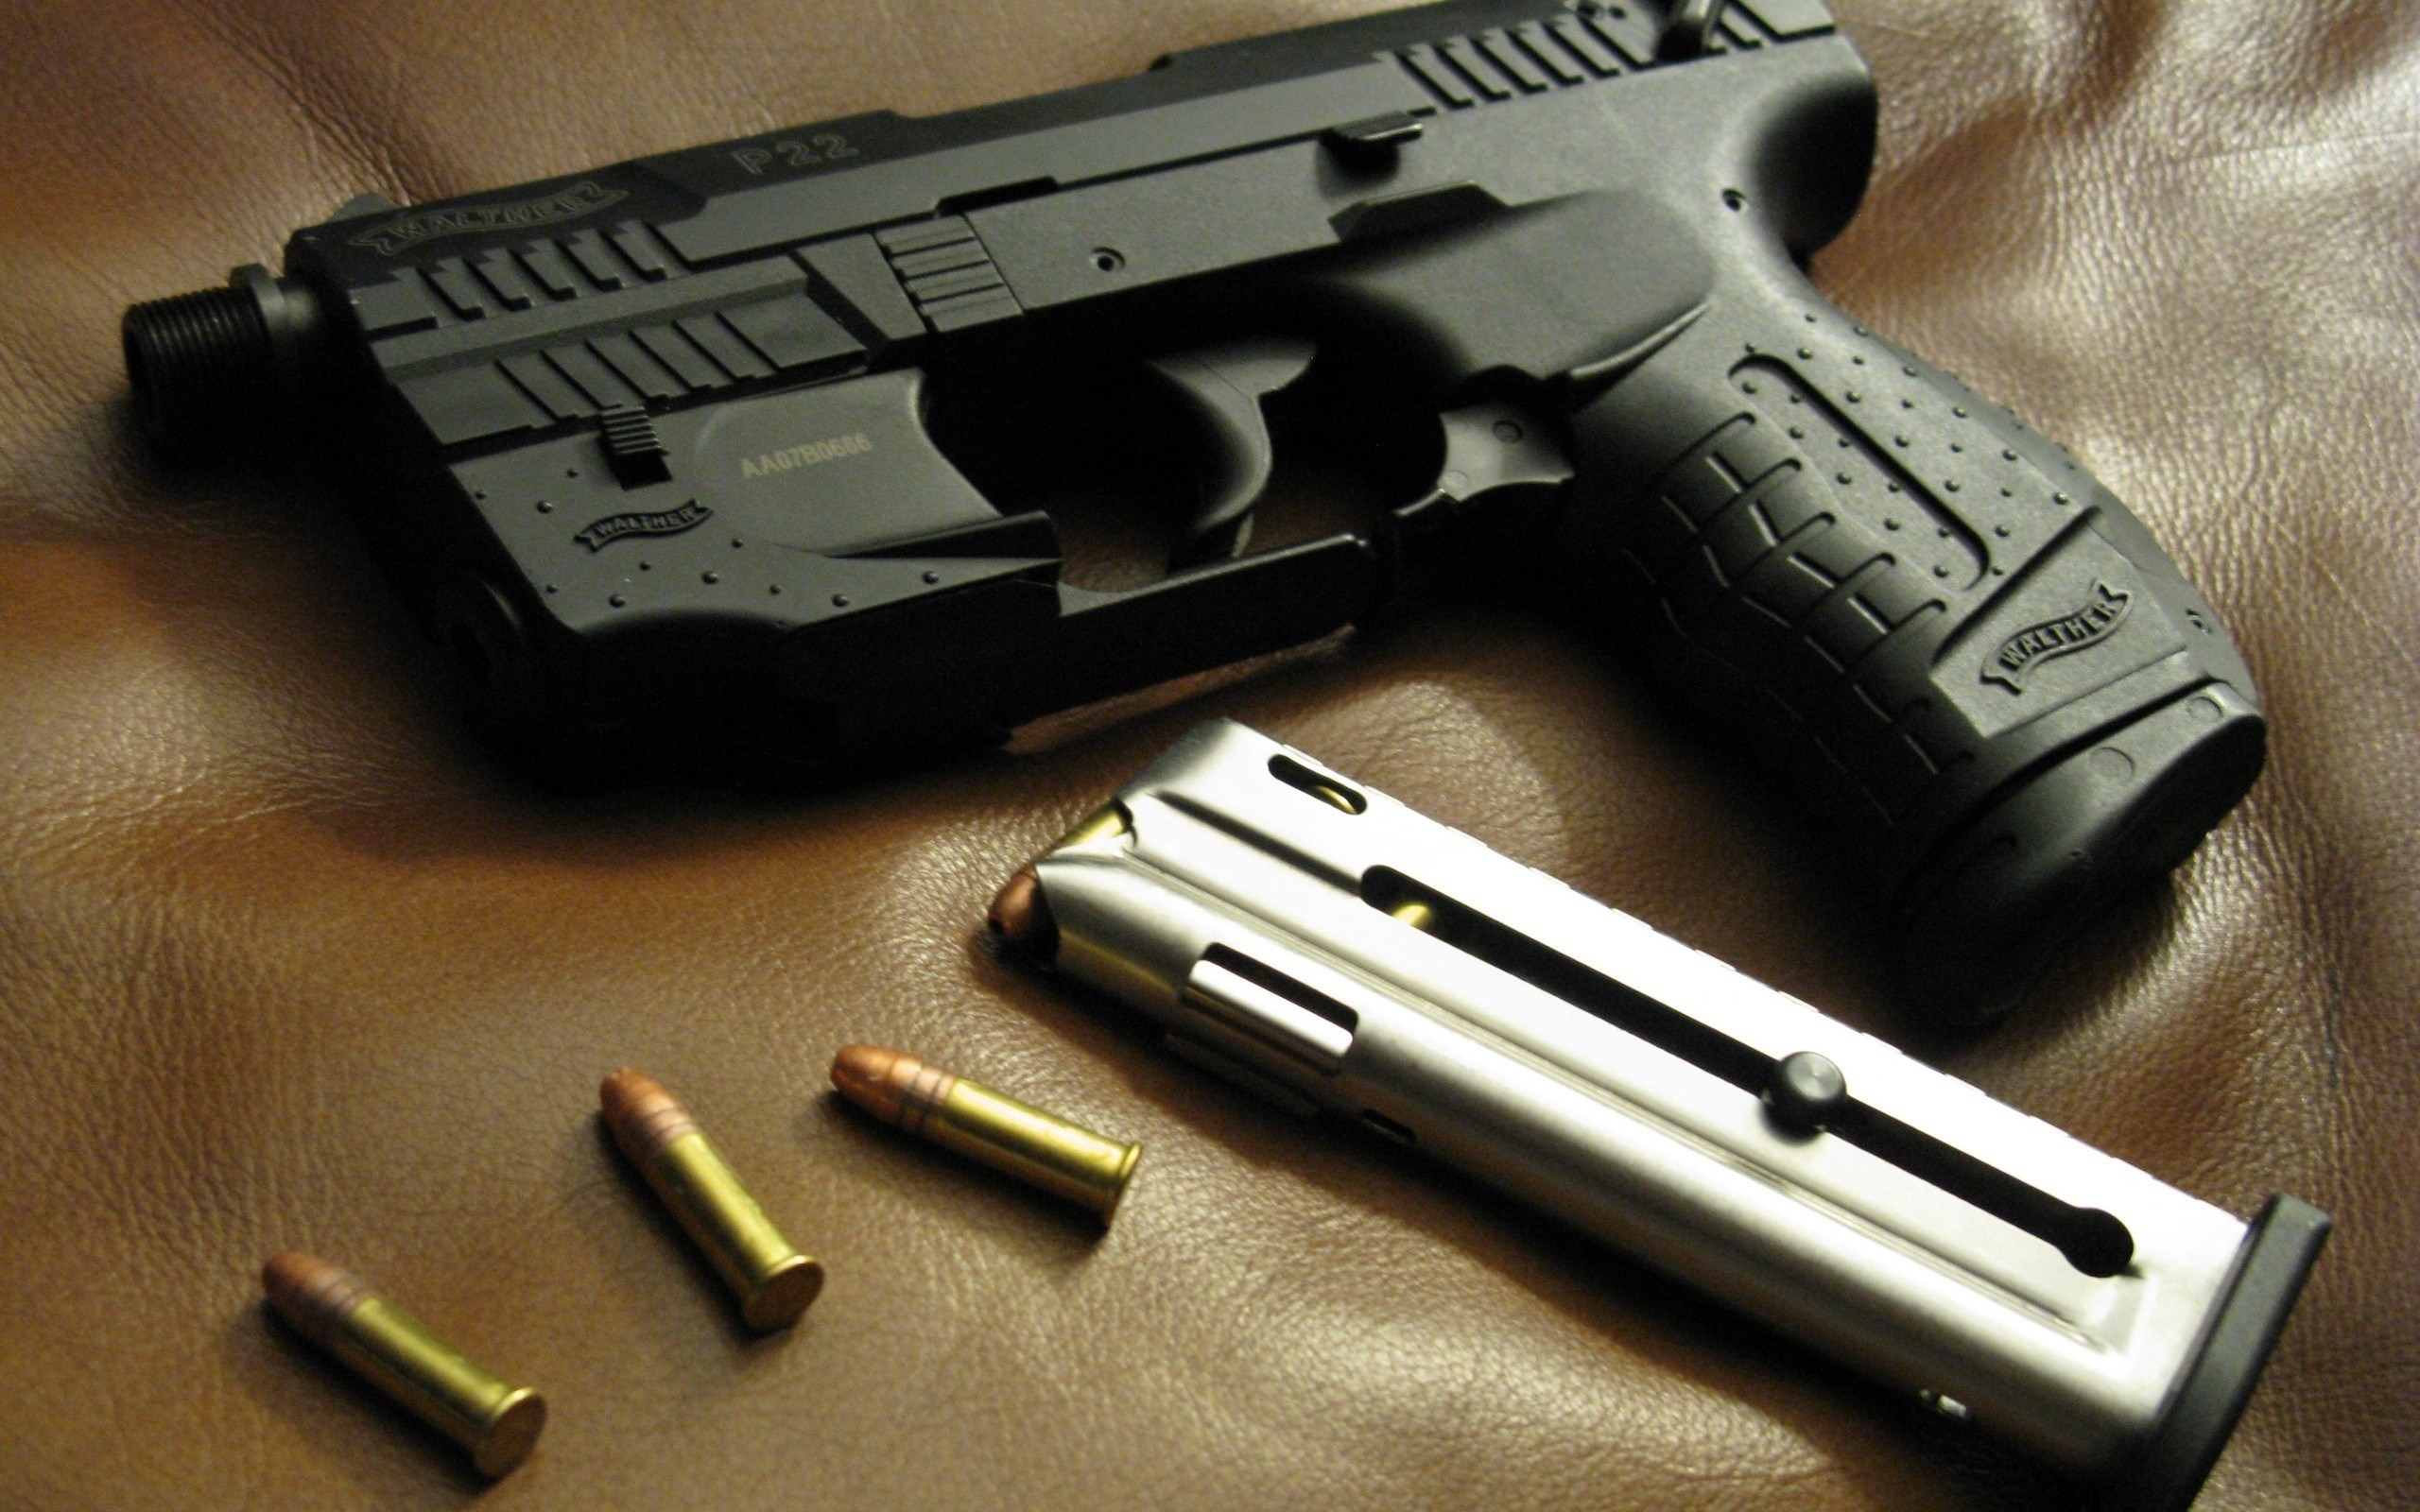 Walther Cp99 Compact Handgun Backgrounds, Compatible - PC, Mobile, Gadgets| 2560x1600 px